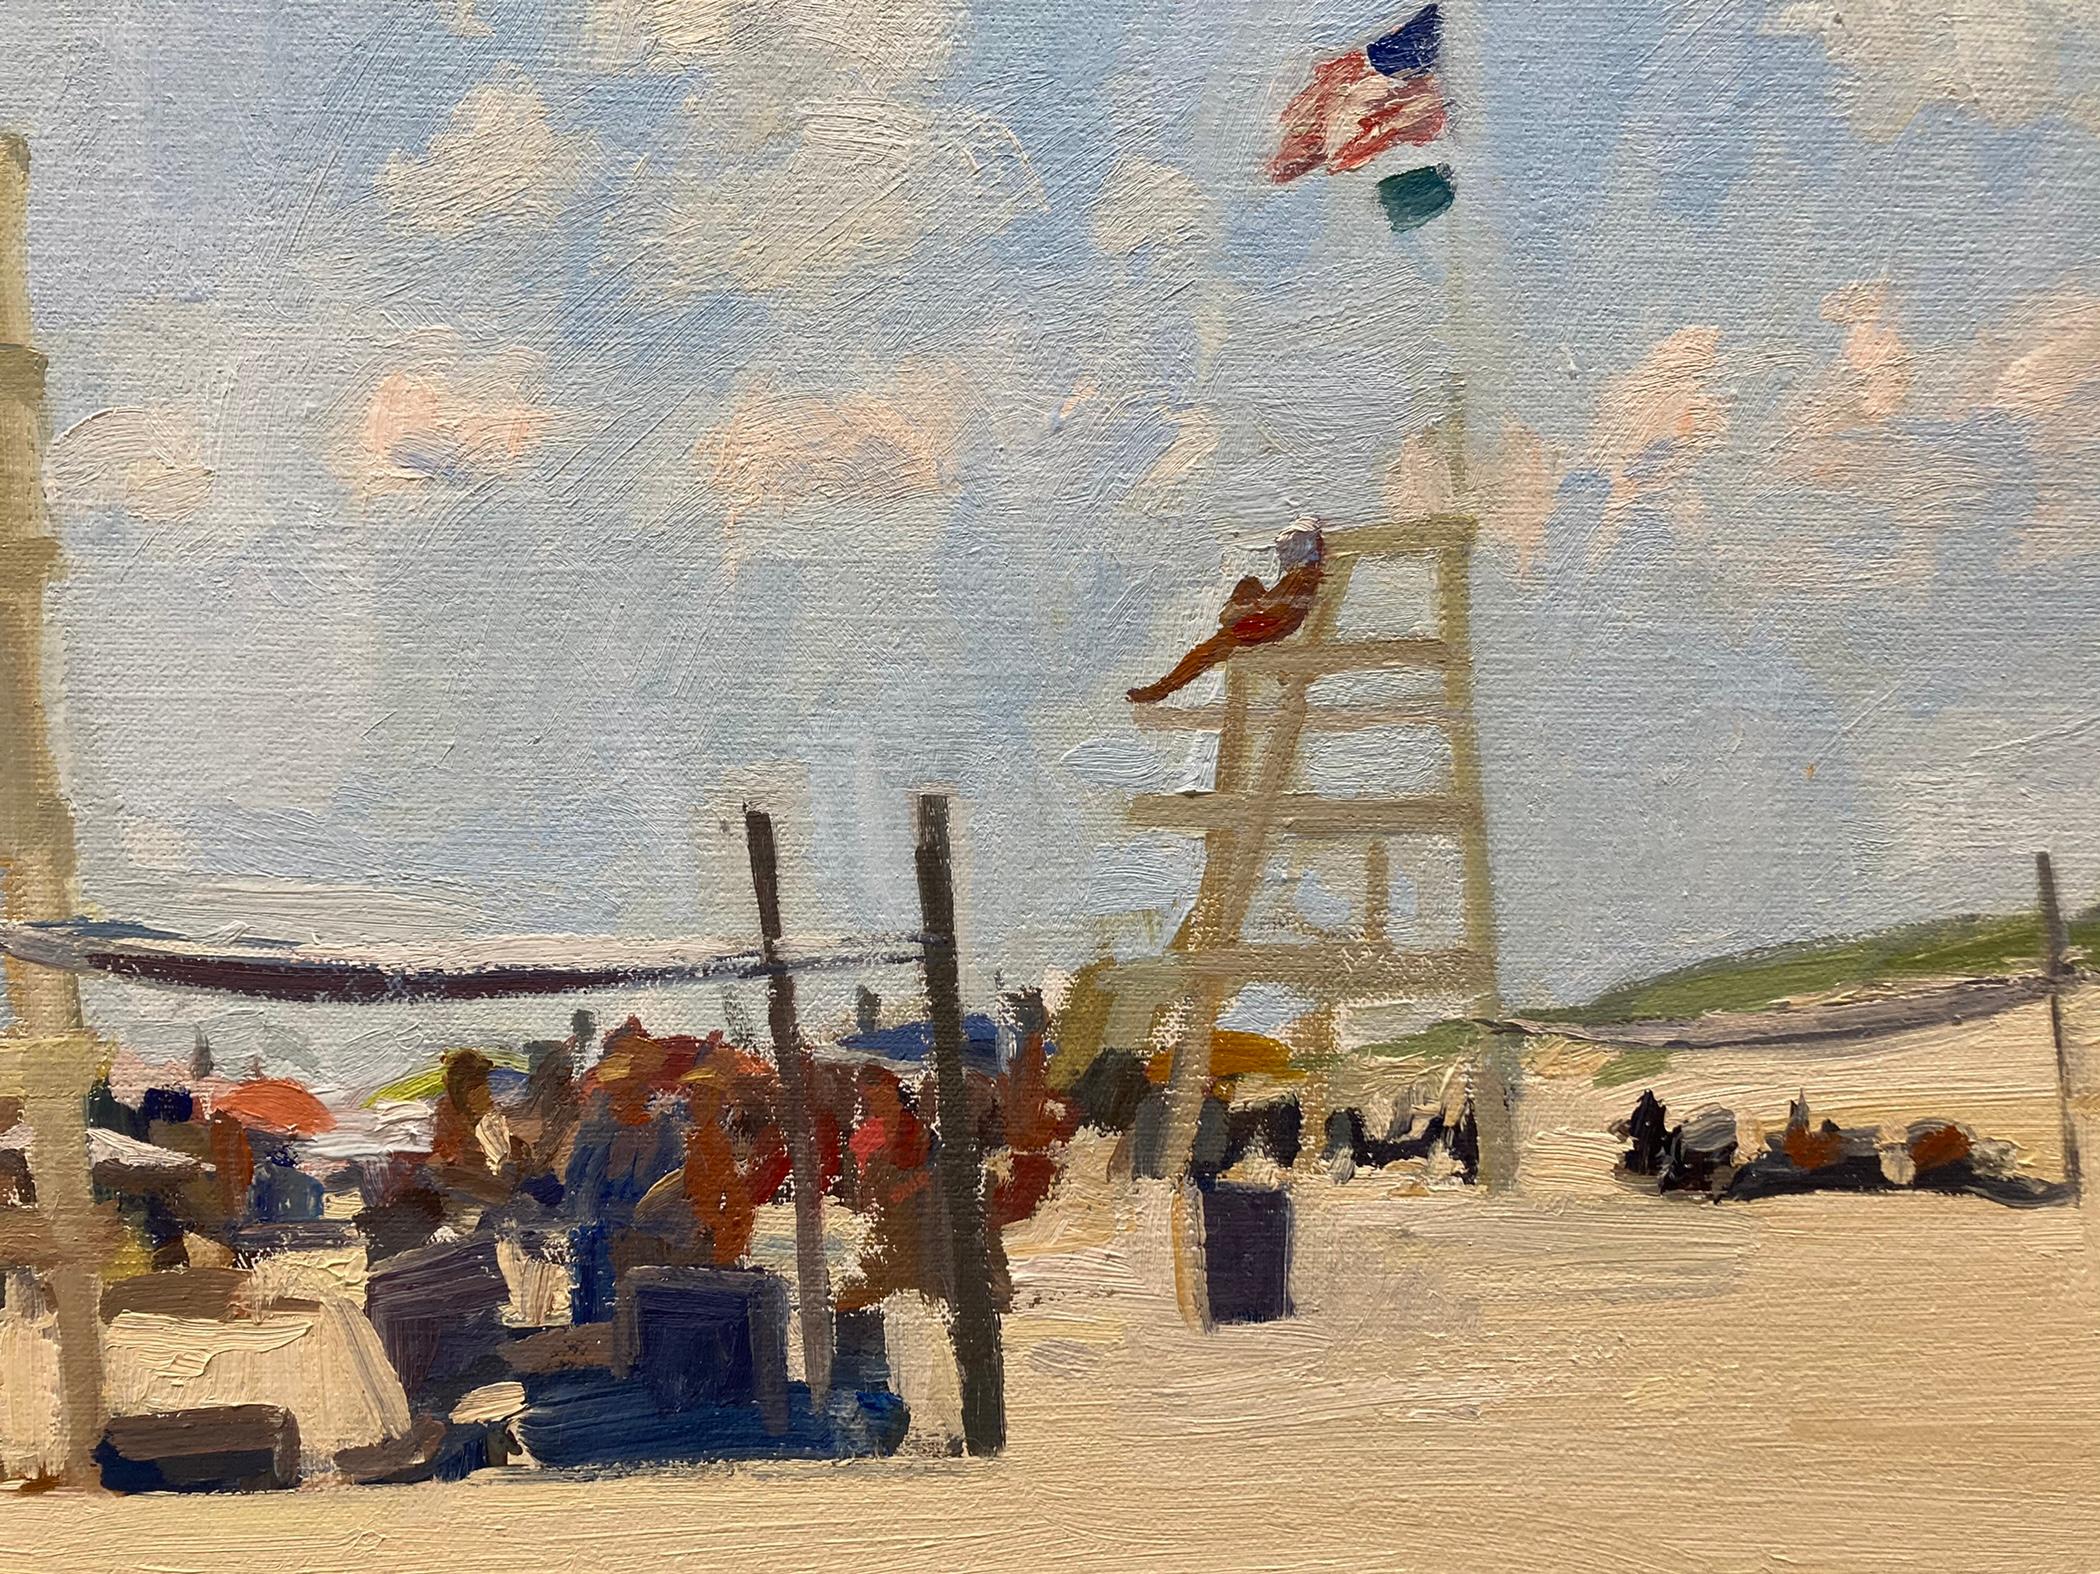 An oil painting, of a bright clear day at a beach. The lifeguards on the lifeguard stands are backlit and the horizon is lined with blue and white umbrellas.

Framed Dimensions: 44.5 x 56.5 inches

Signed by the artist in the bottom right